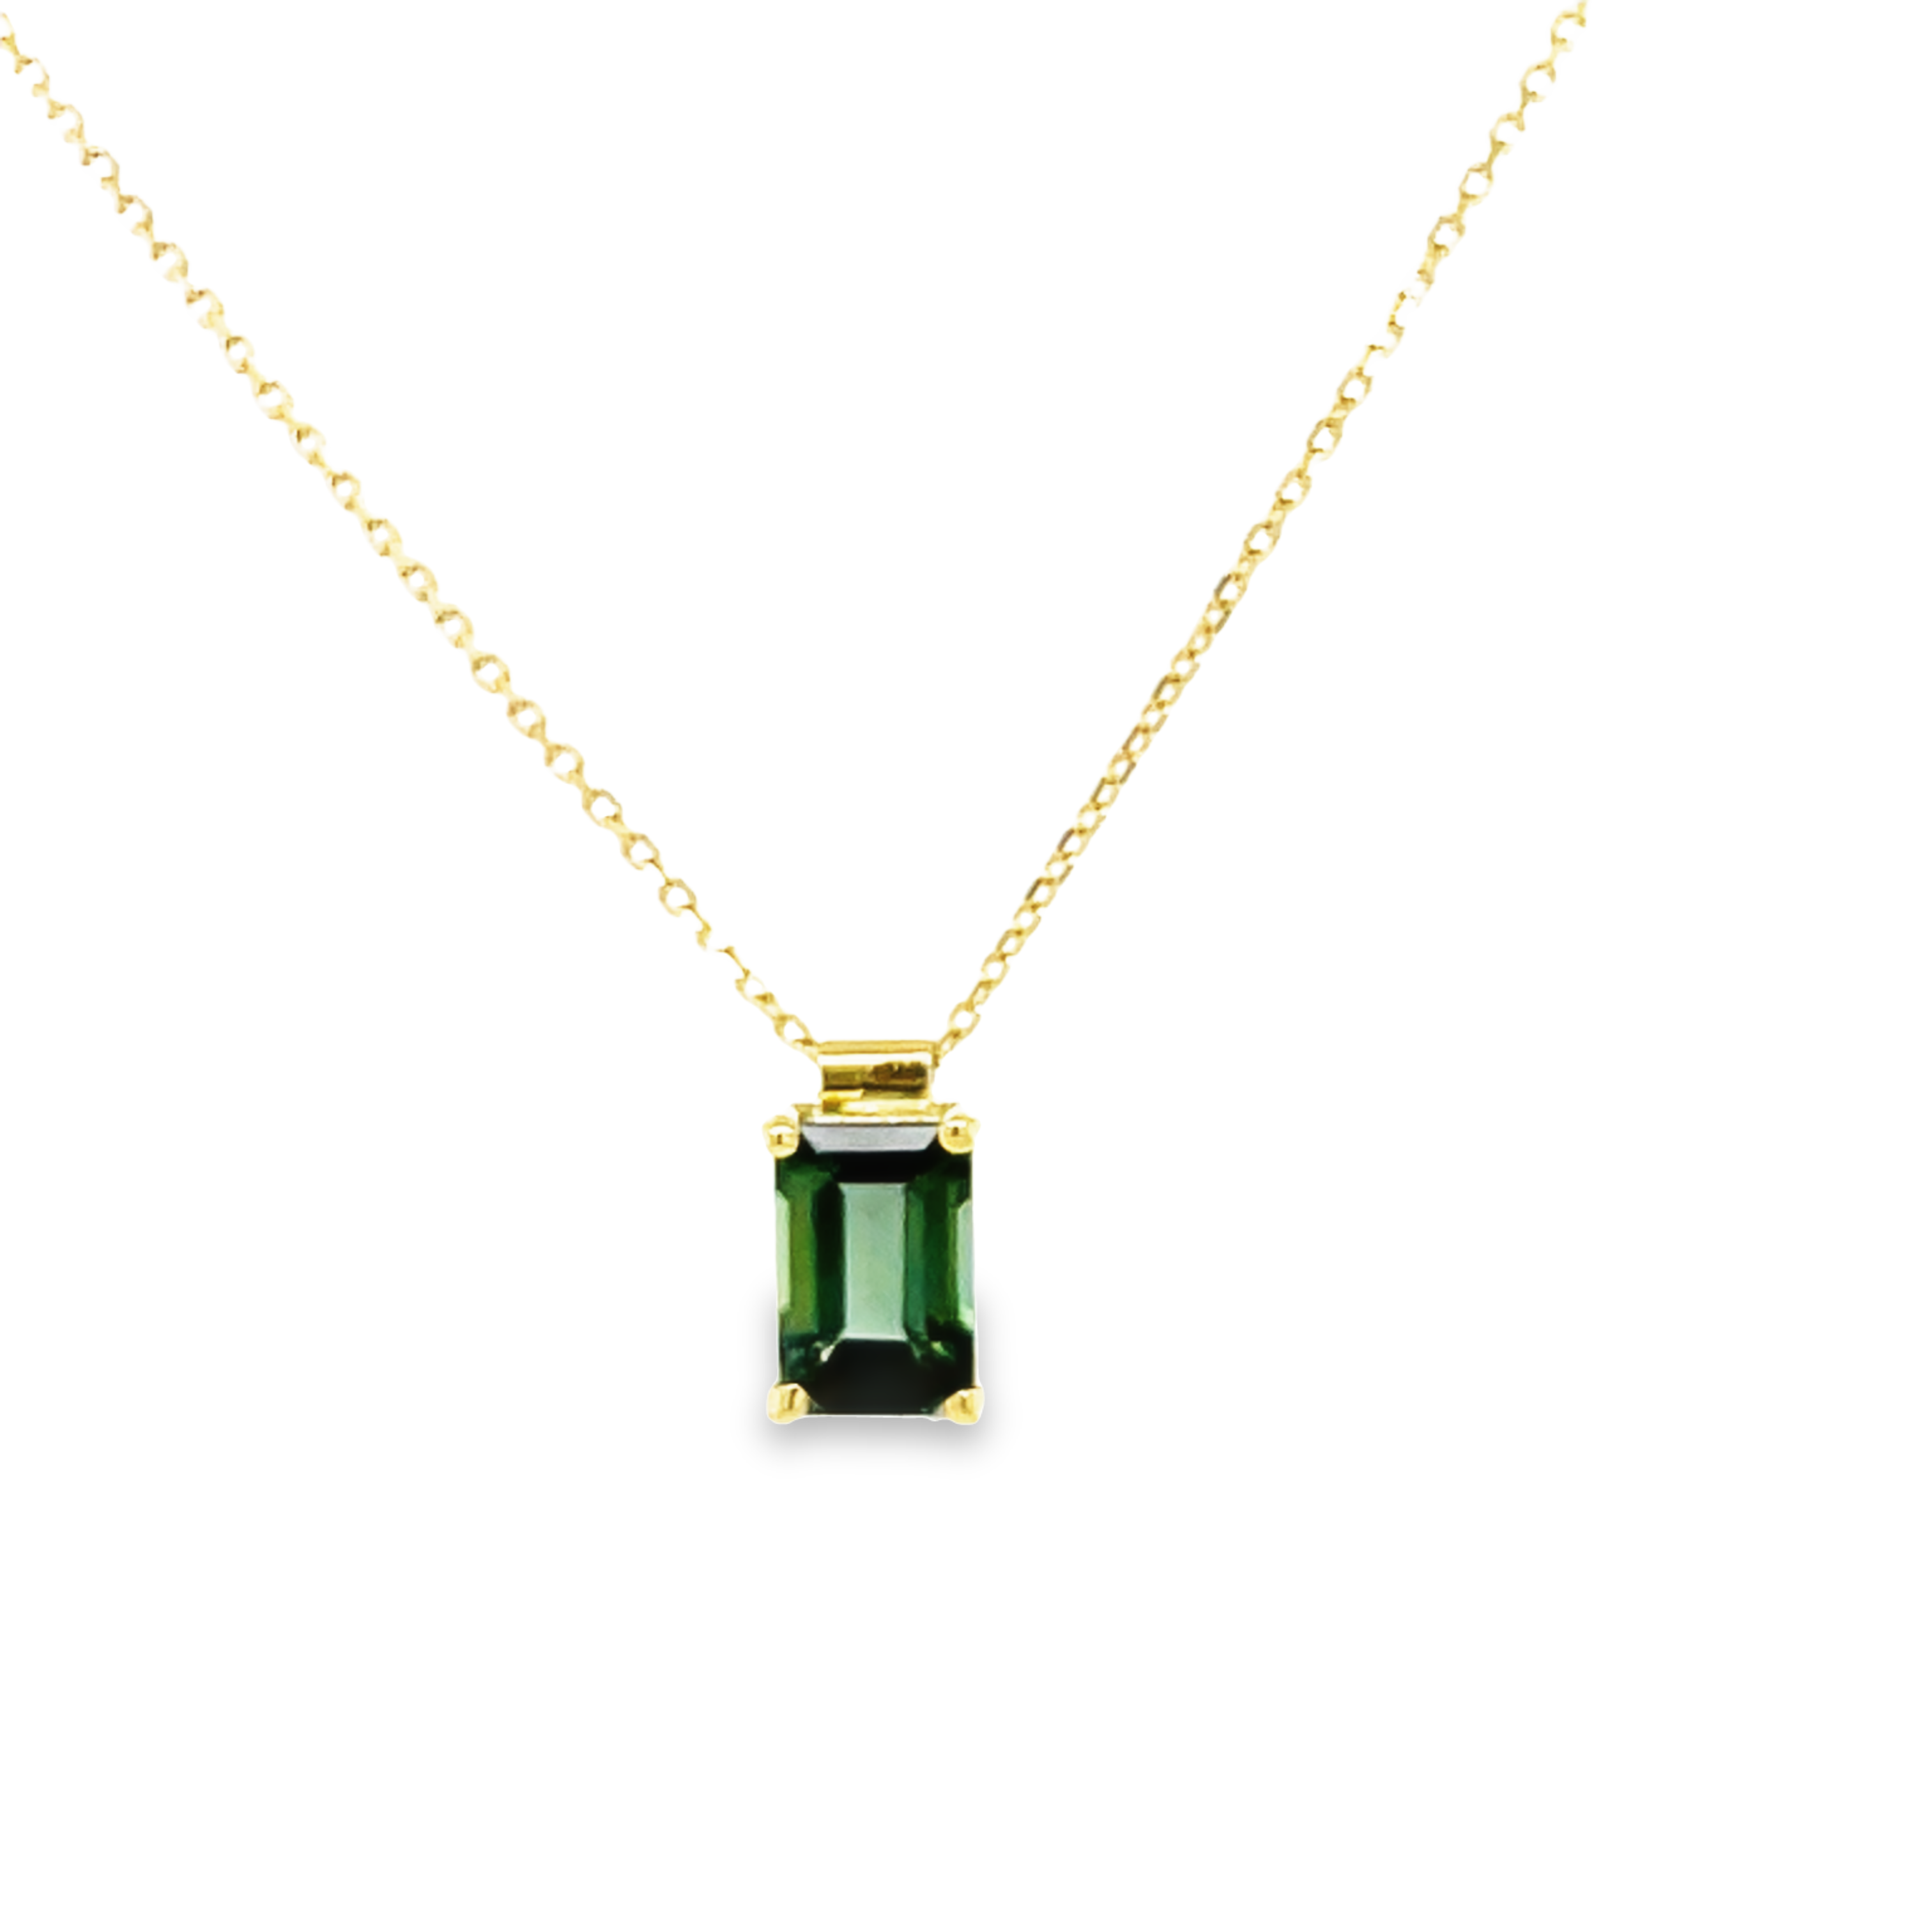 This striking 18k white gold green tourmaline baguette cut pendant of 0.40 cts, 8.00 x 5.00 mm (including bail) is perfectly complemented with the 18k yellow gold 18" chain - an exquisite piece!